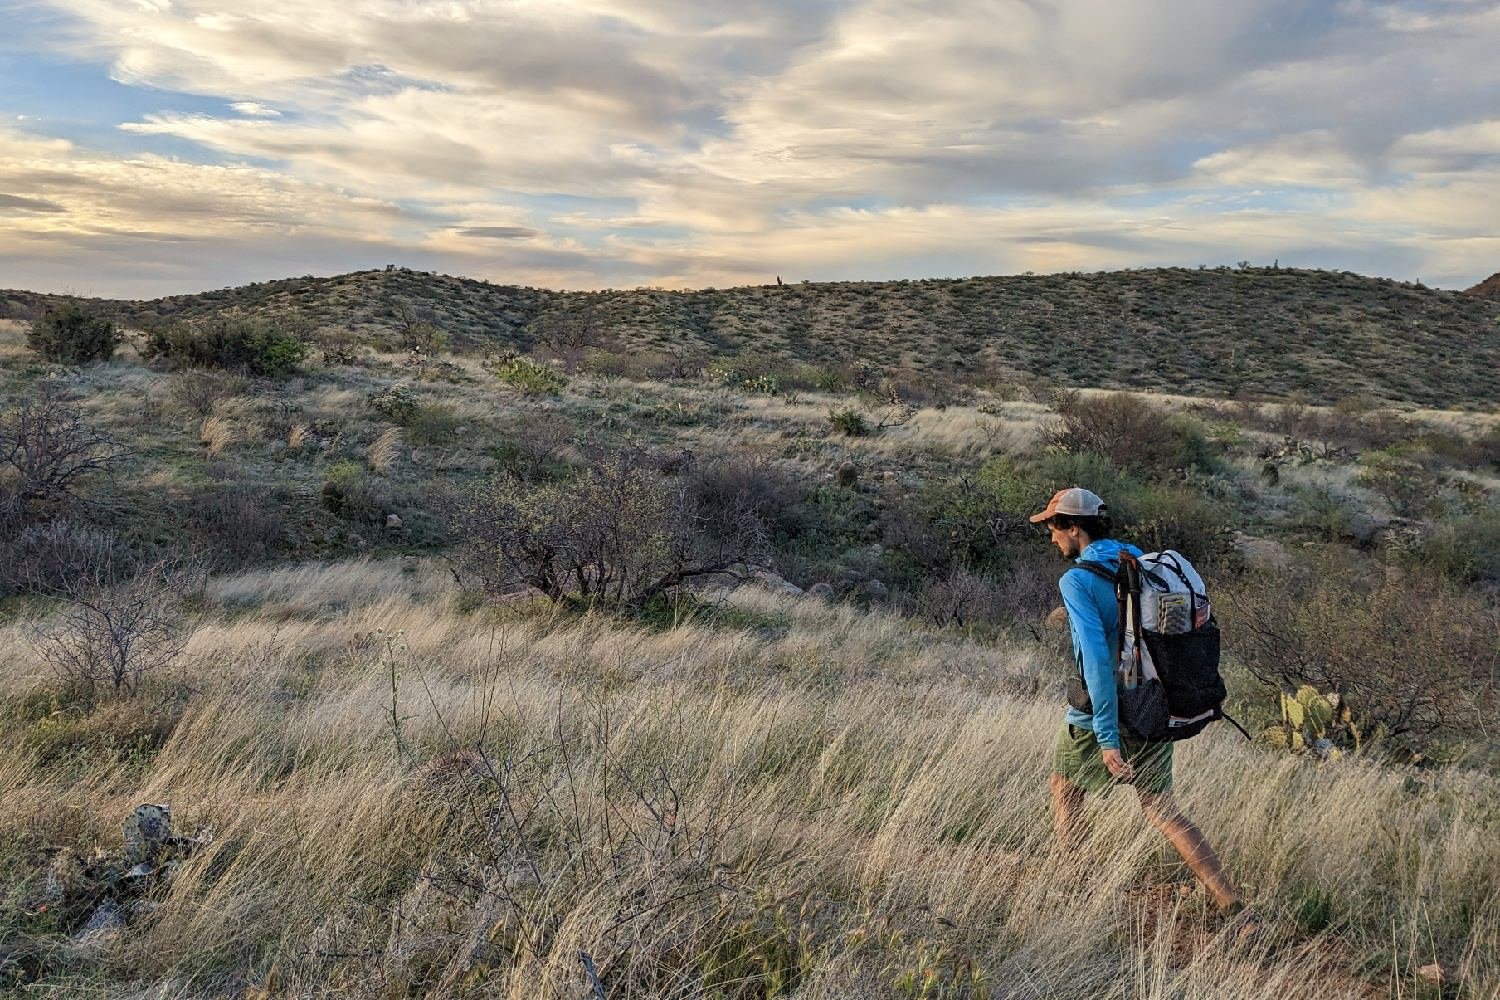 a side view of a hiker wearing the Hyperlite Mountain Gear Unbound 40 walking on a desert trail through some waving grass